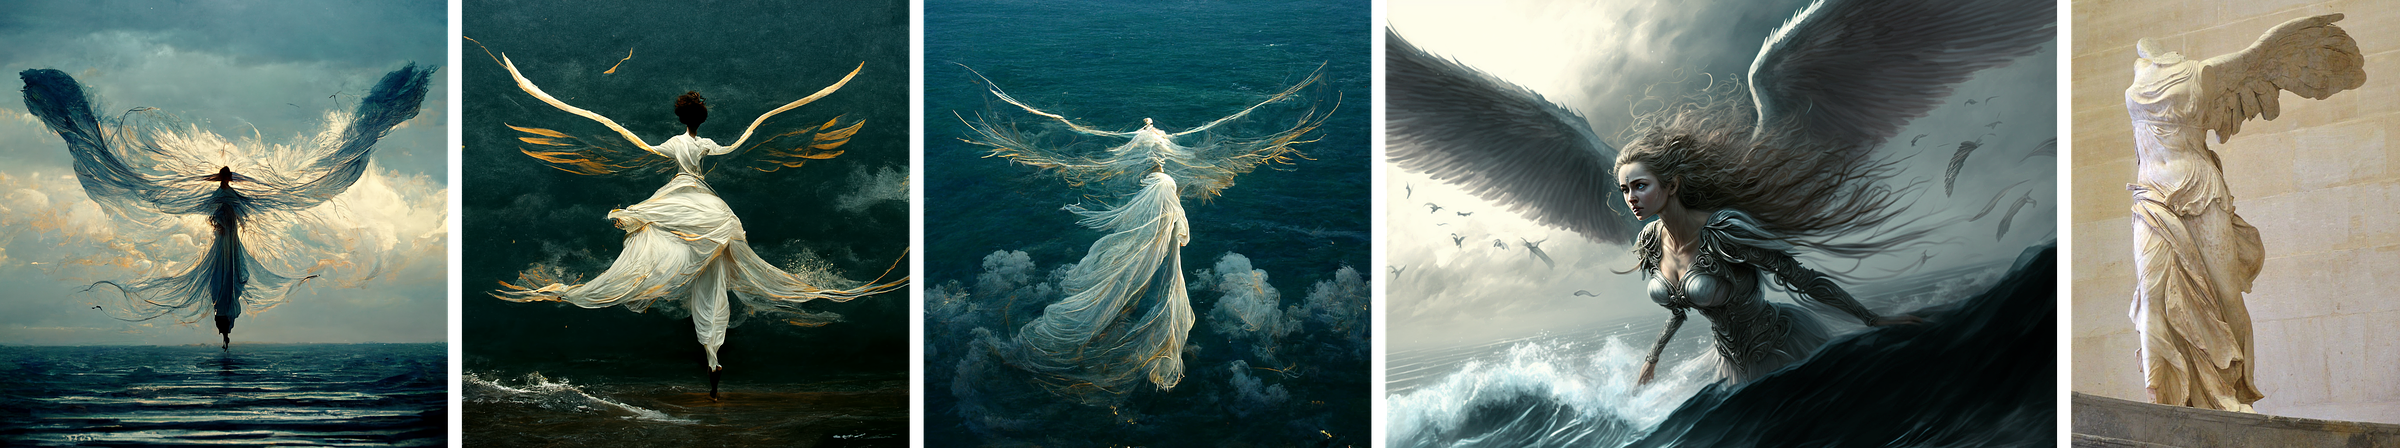 Five images. The first three are painterly illustrations of an angelic or ghostly winged floating over blue water, wearing a loose, flowing garment. She has large wings extending out and upward. The fourth image shows a winged female figure wearing filigreed armor. She has long windswept flowing hair. She is emerging from a wave of water. The fifth image shows Victory of Samothrace, a dramatic, larger than life, ancient Greek sculpture in white marble depicting Nike, the winged goddess of victory. The figure’s arms and head are missing and only her dramatically posed body, draped in the intricately carved, flowing fabric and her swept-back, feathered wings are intact. The garment is very closely fitted from the waist up, revealing the contours of her stomach and breasts. Flowing folds and valleys in the stone garment cover her from the waist down. She is on the bow of a warship, striding forward, landing, or taking flight. Loose fabric flows dramatically behind her, caught and animated by the wind.